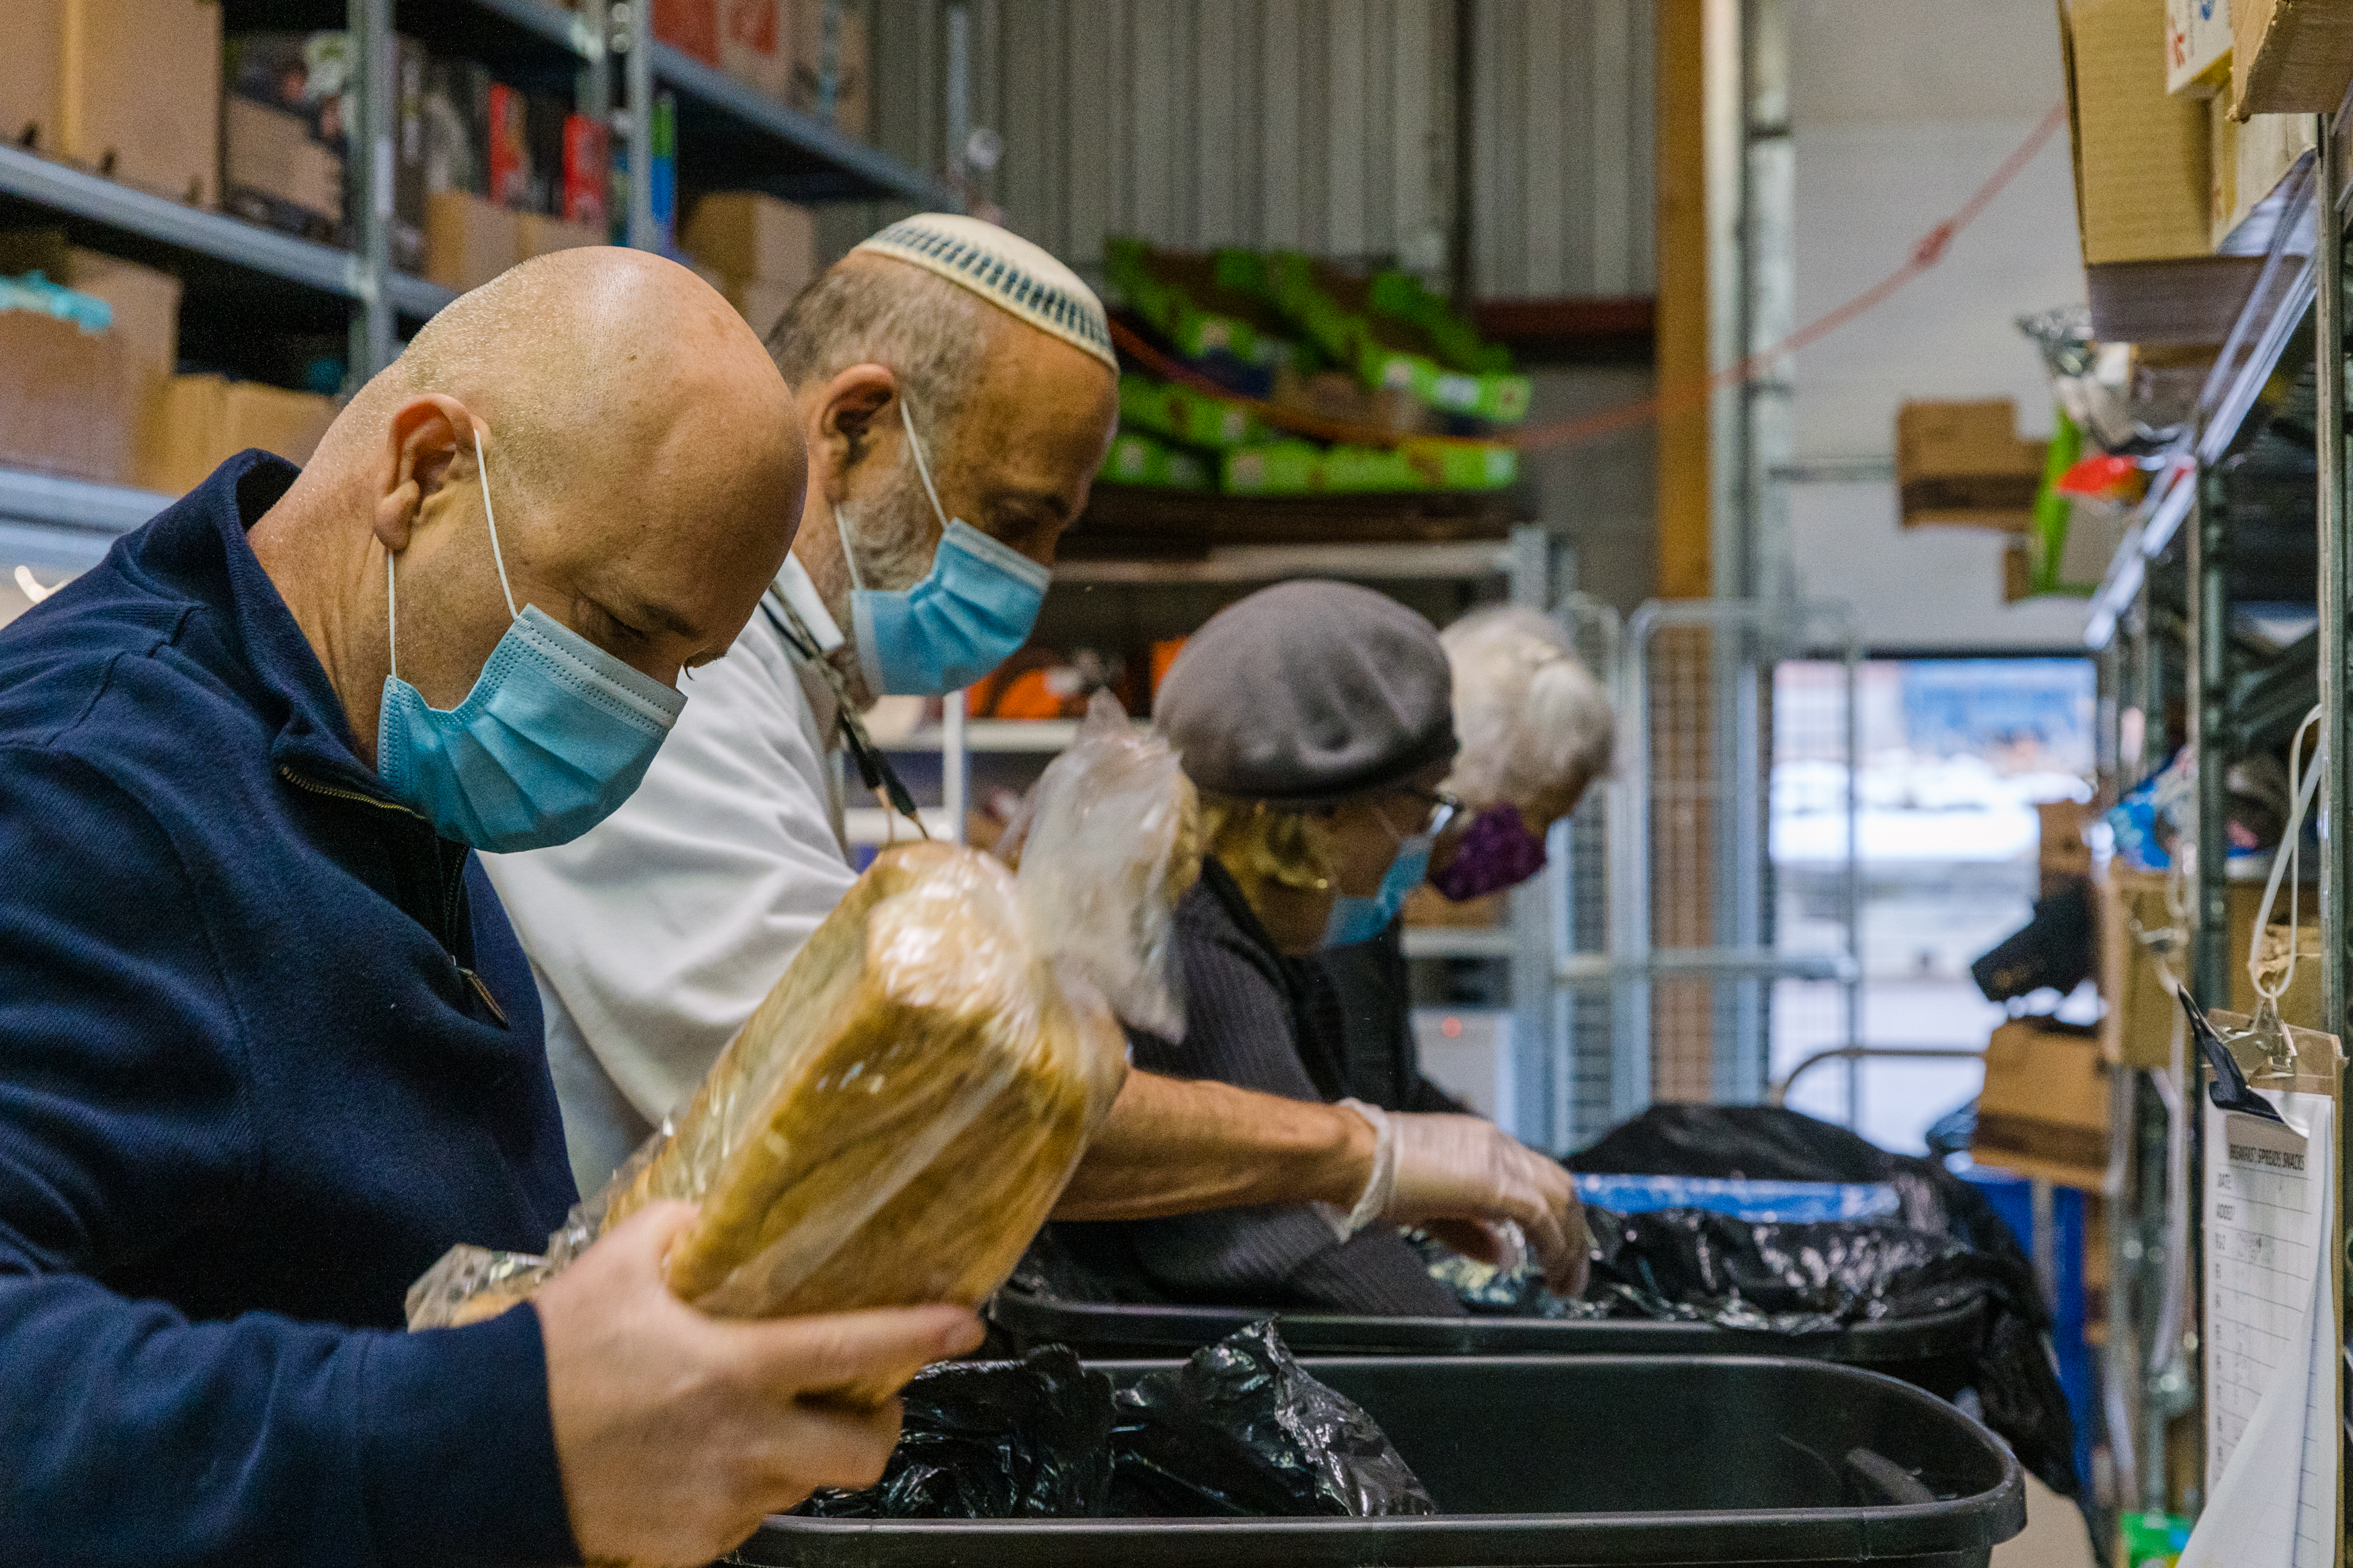 People work at a jewish food bank in Toronto preparing food for families in need of help during COVID 19 pandemic.